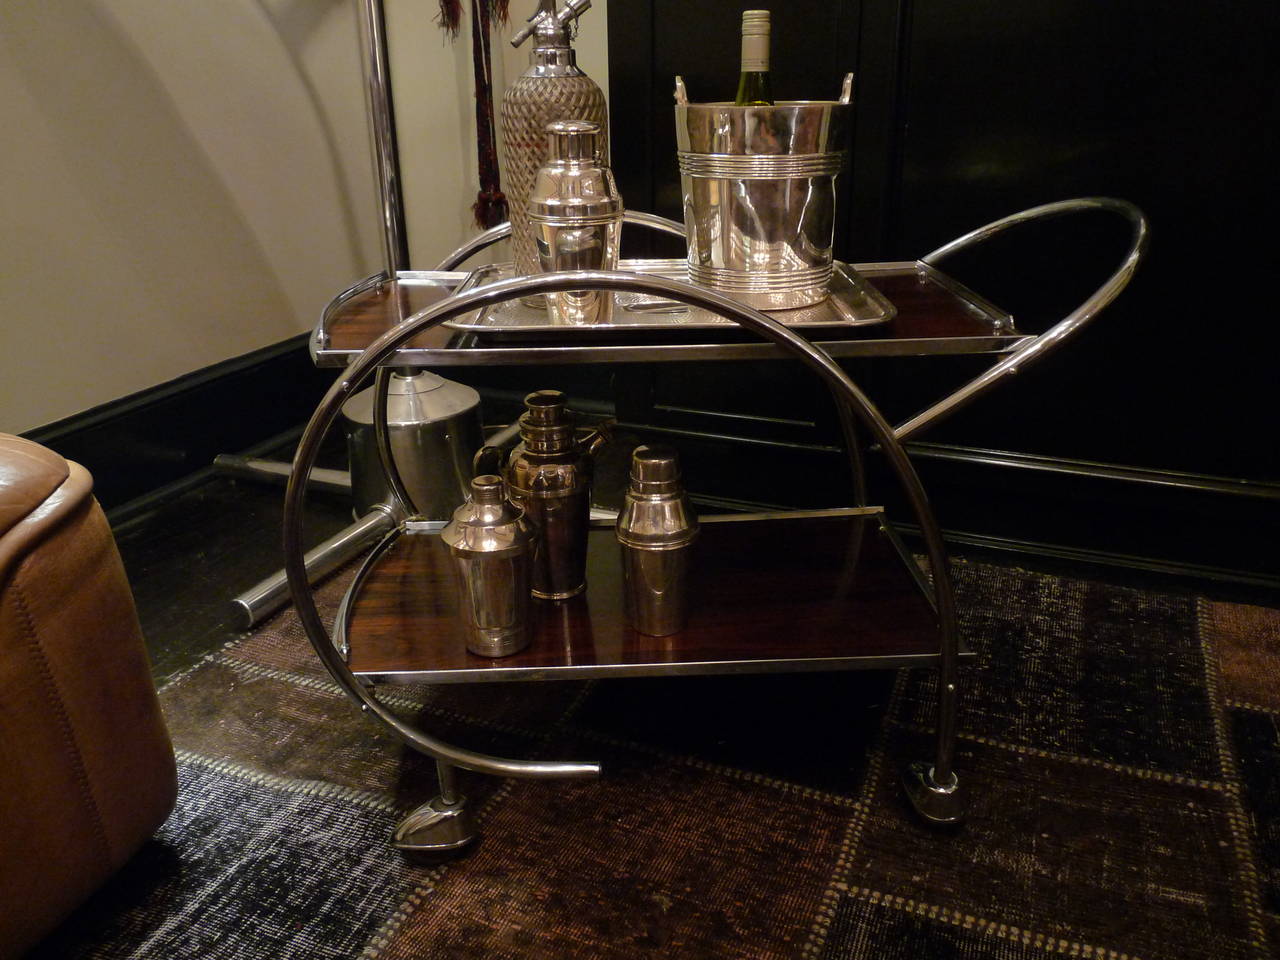 A stylish and functional rosewood veneer and chrome drinks trolley.